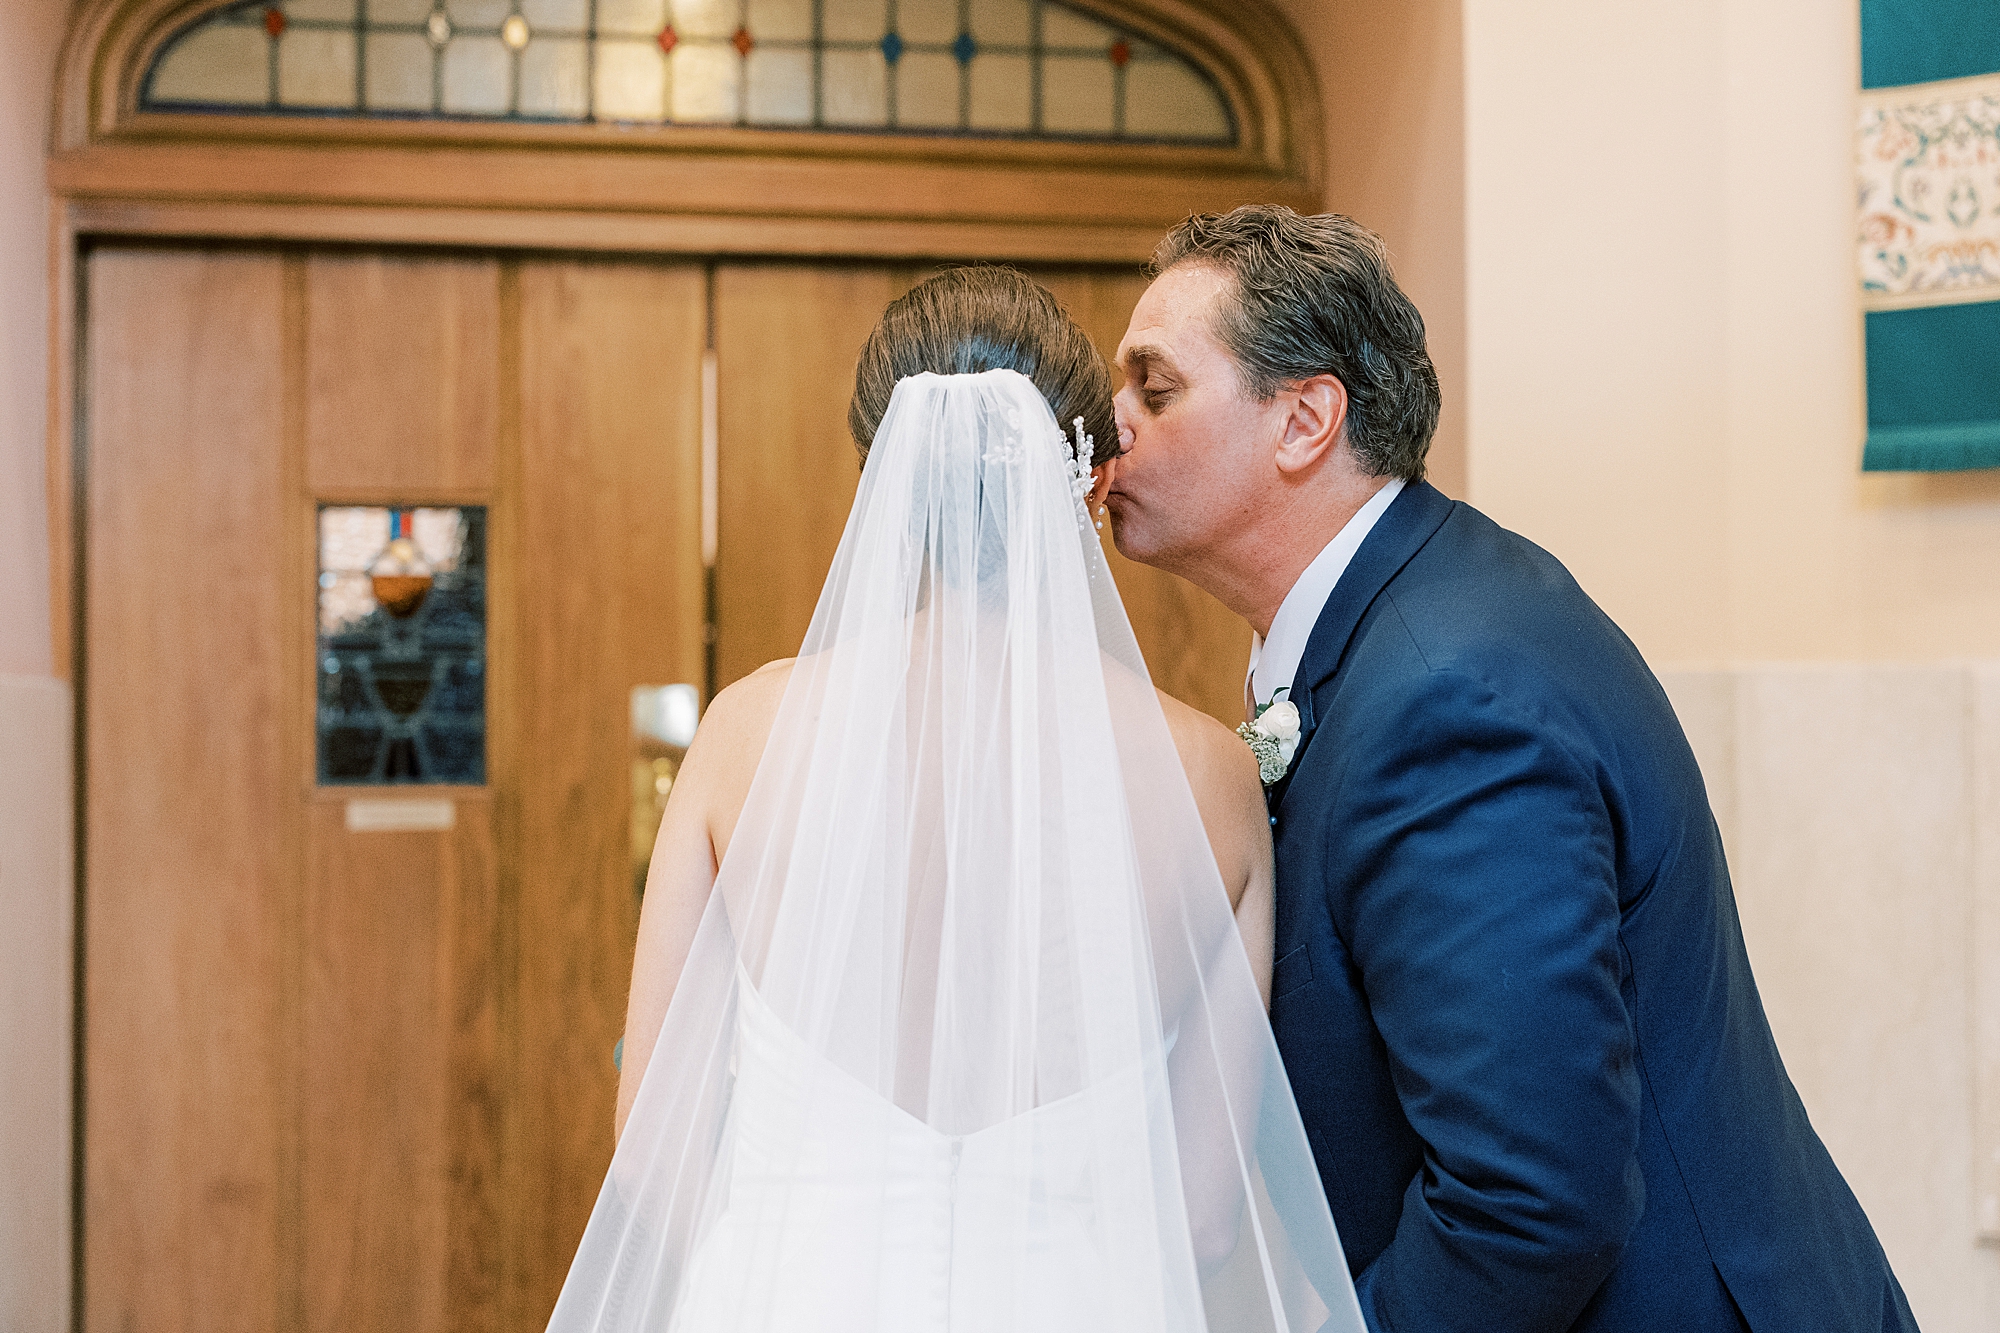 dad kisses bride's cheek before walking her down aisle for traditional wedding ceremony at Philadelphia PA church